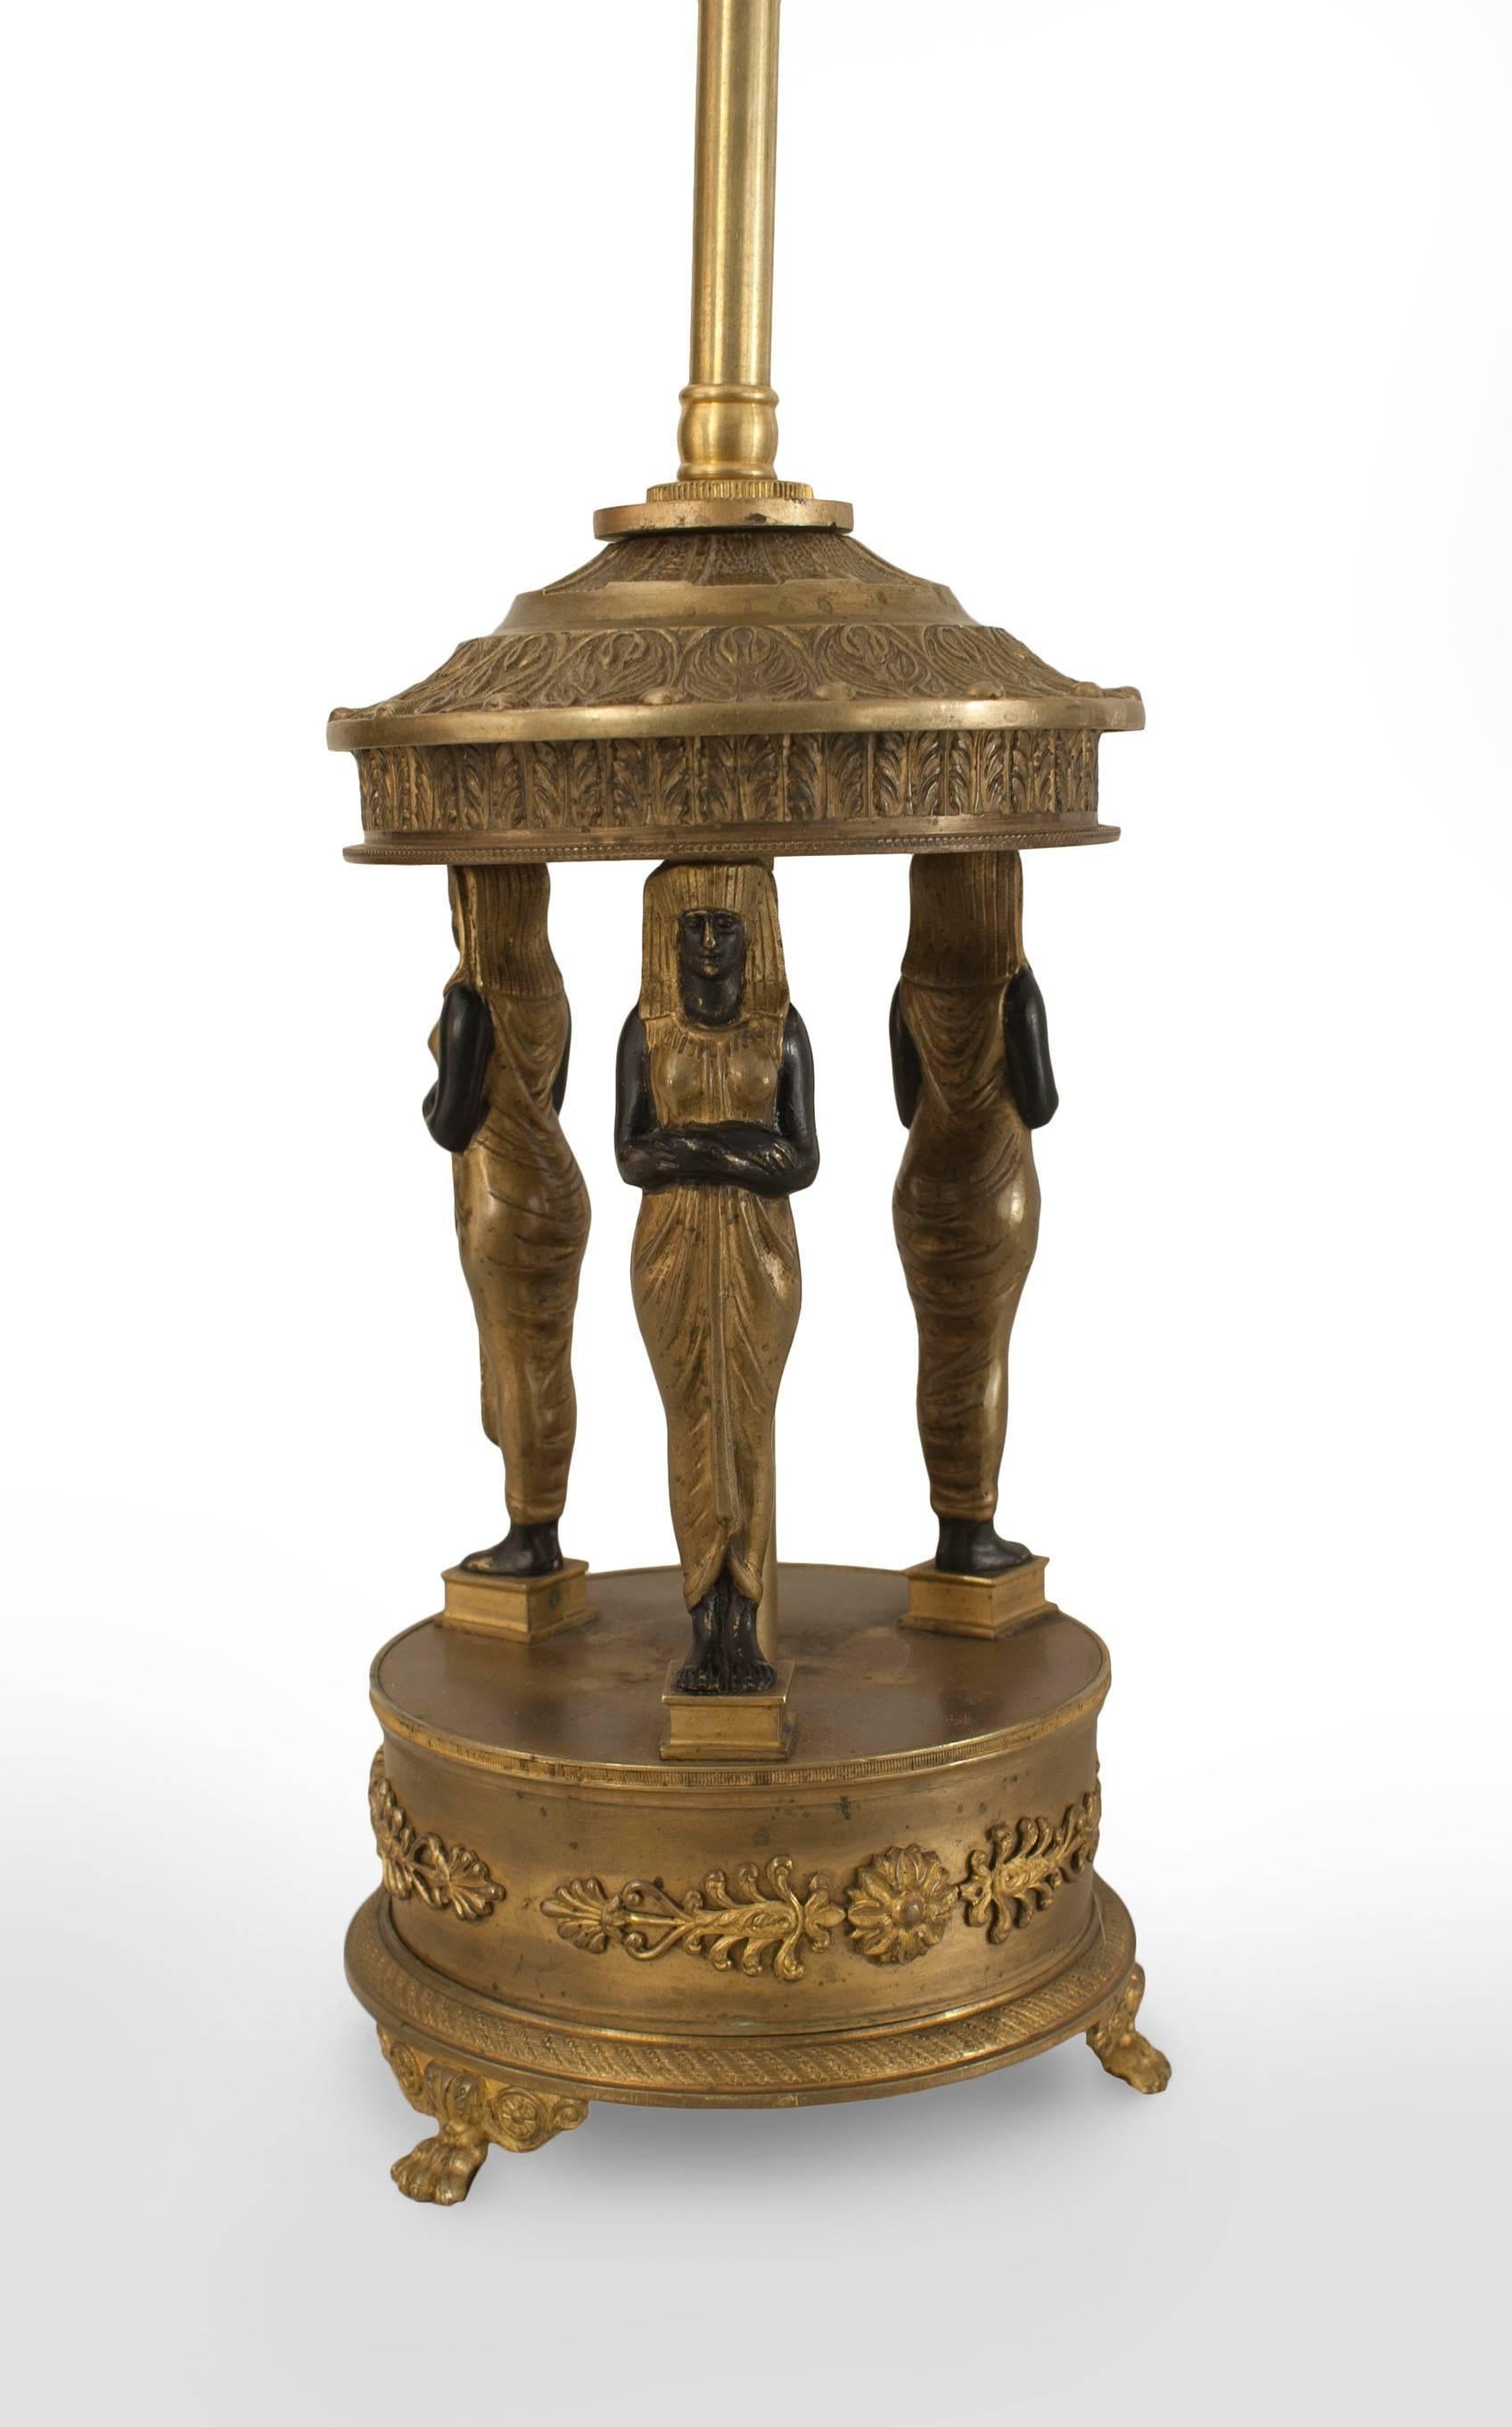 French Empire-style (19th Century) bronze lamp with 3 Egyptian ebonized & gilt figures resting on a round base.
